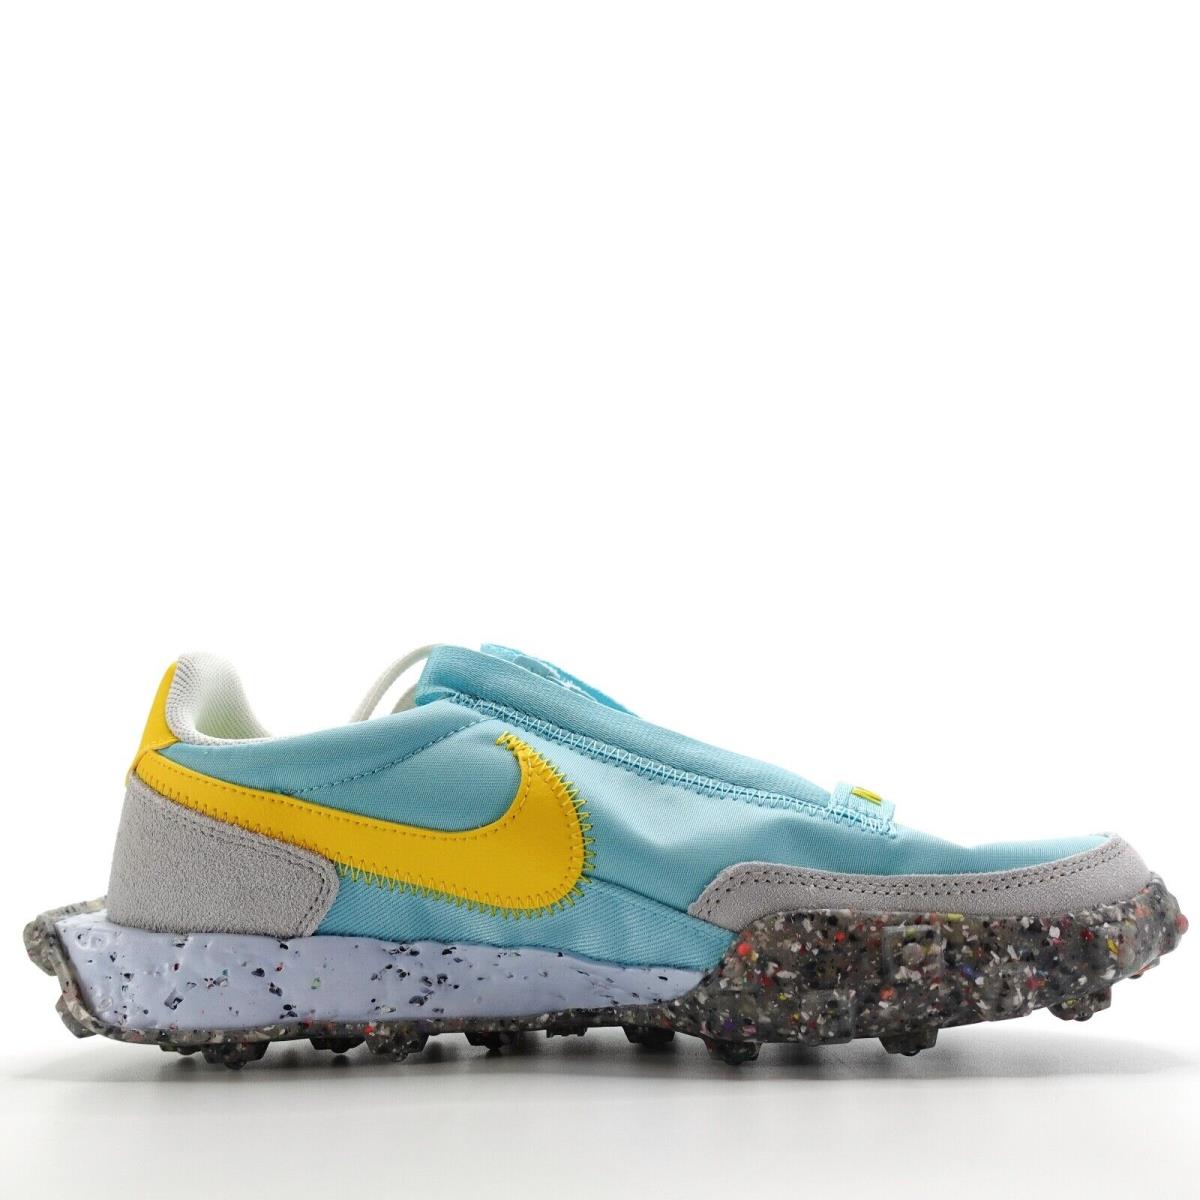 Nike Waffle Racer Crater Womens Shoes Bleached Aqua Speed Yellow CT1983-400